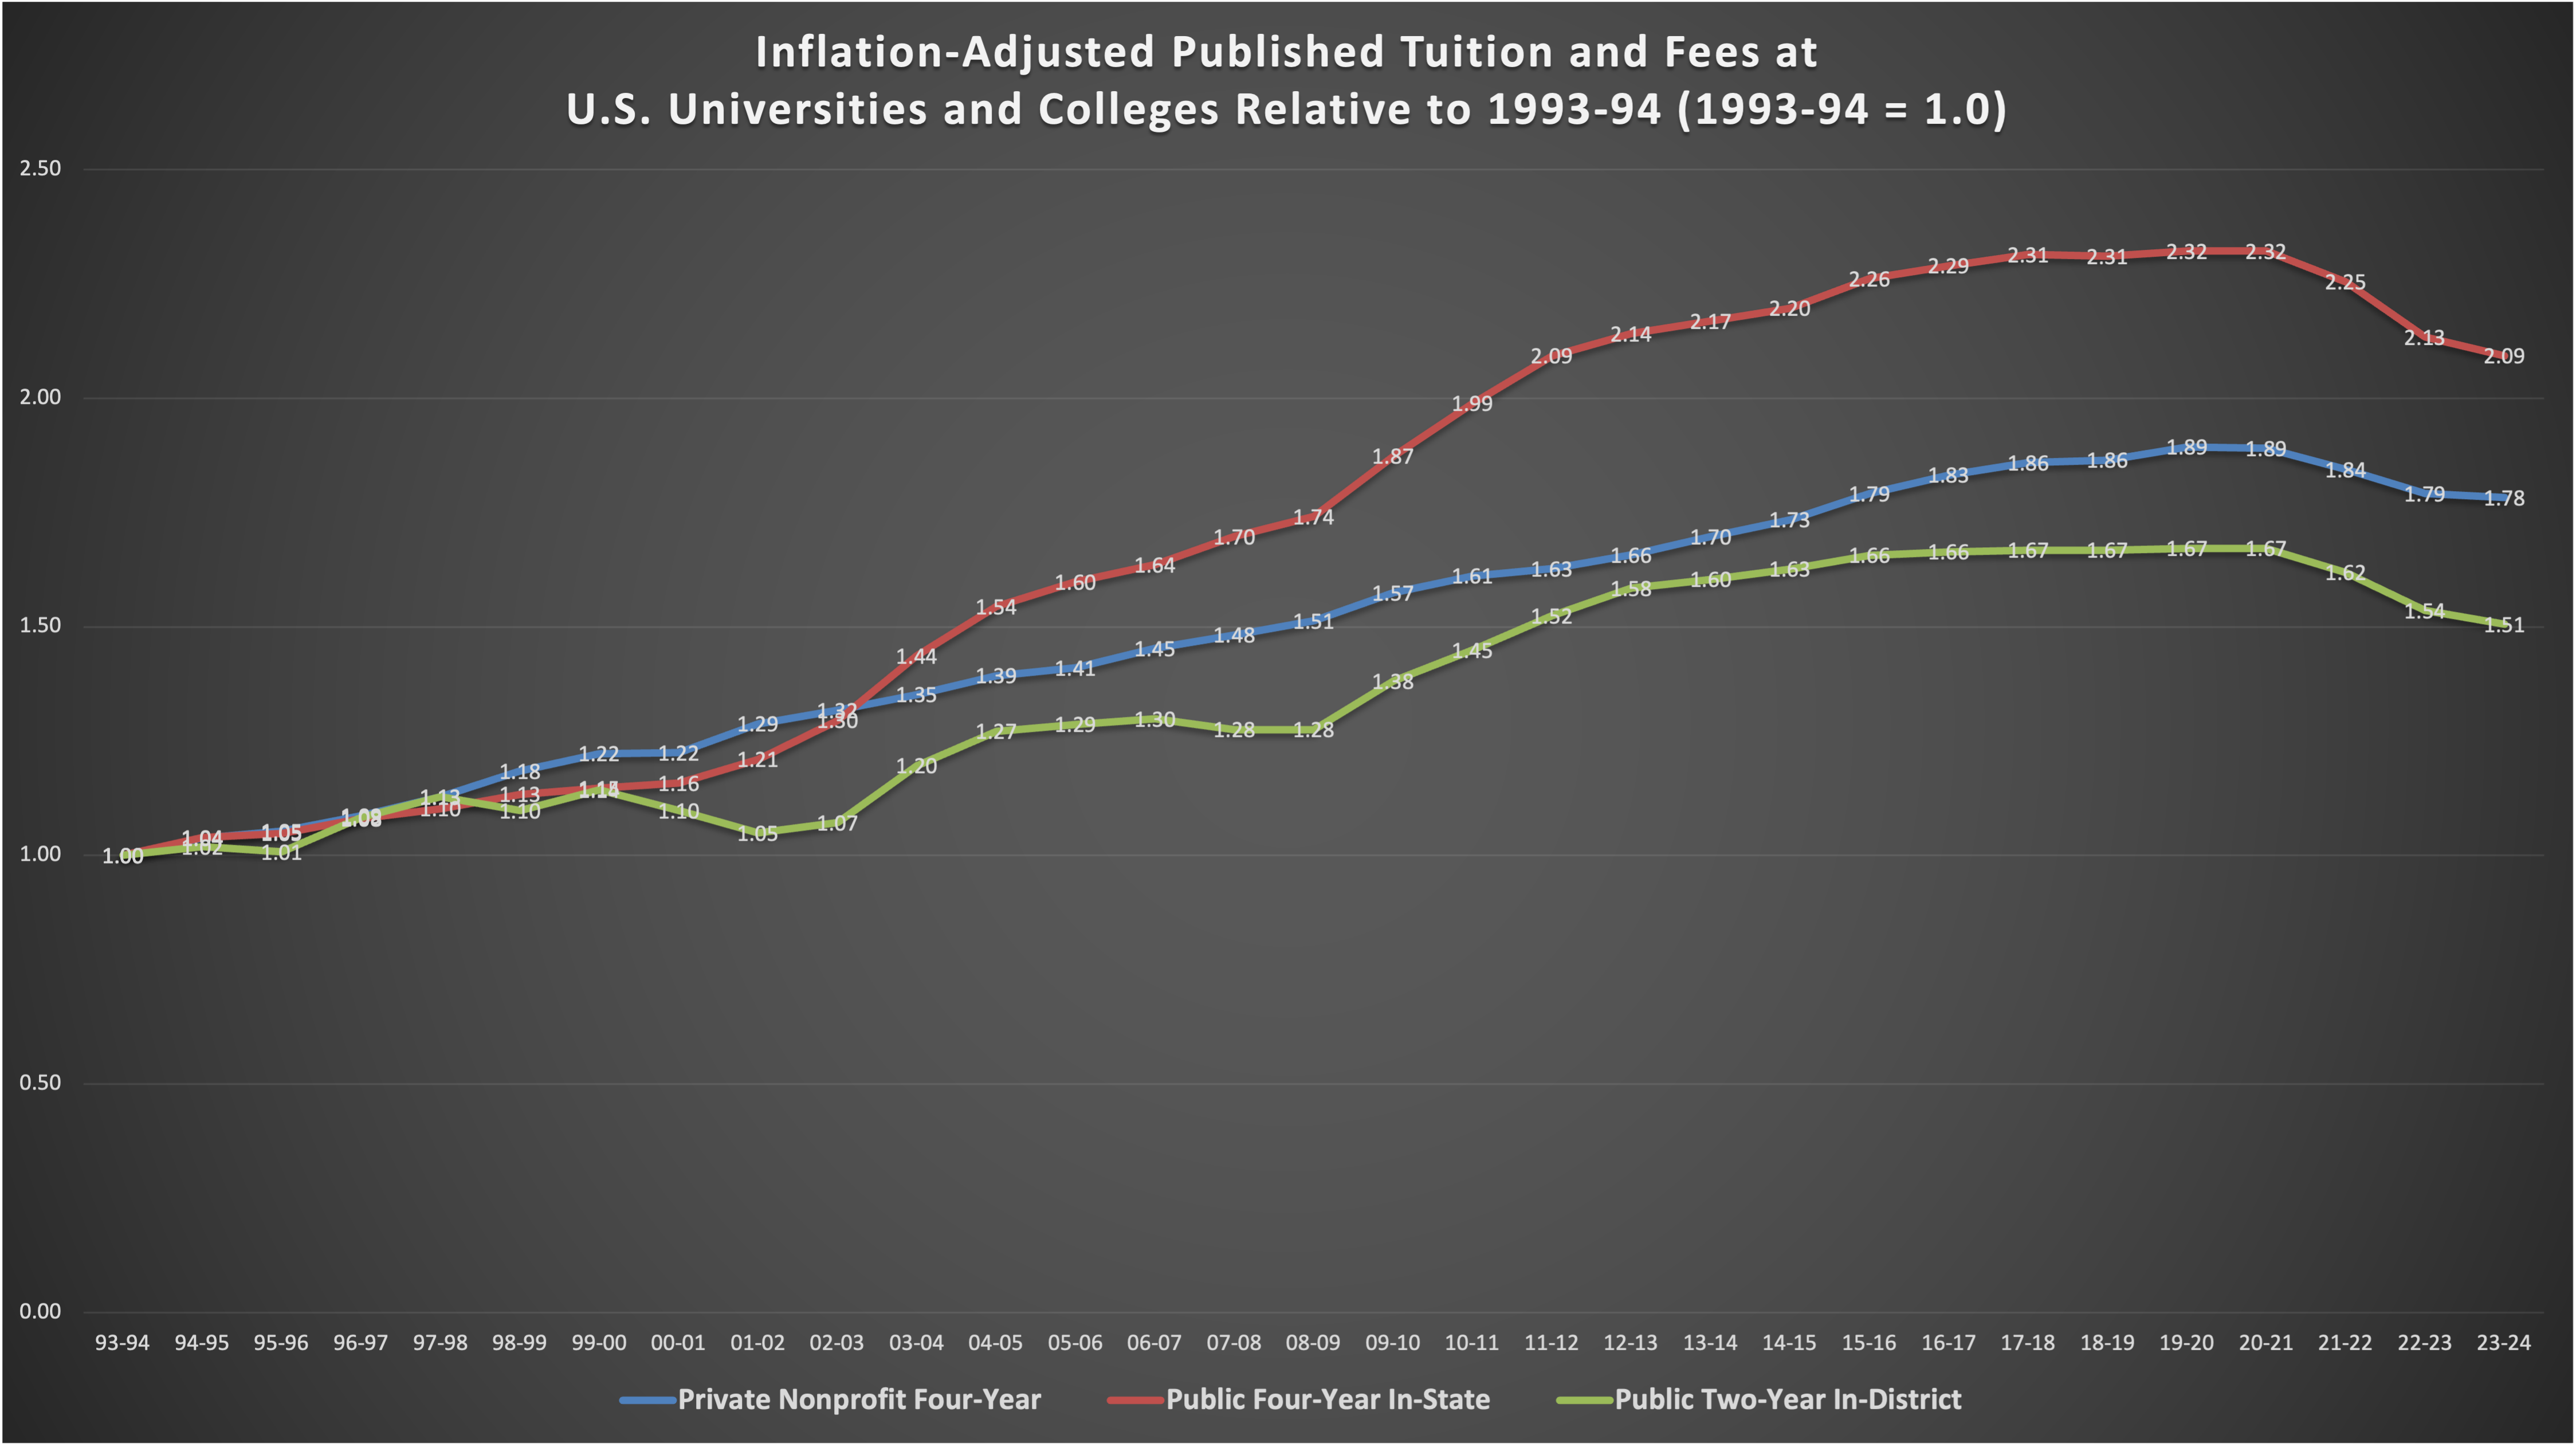 Inflation-Adjusted Published Tuition and Fees at U.S. Universities and Colleges Relative to 1993-94 (1993-94 = 1.0)